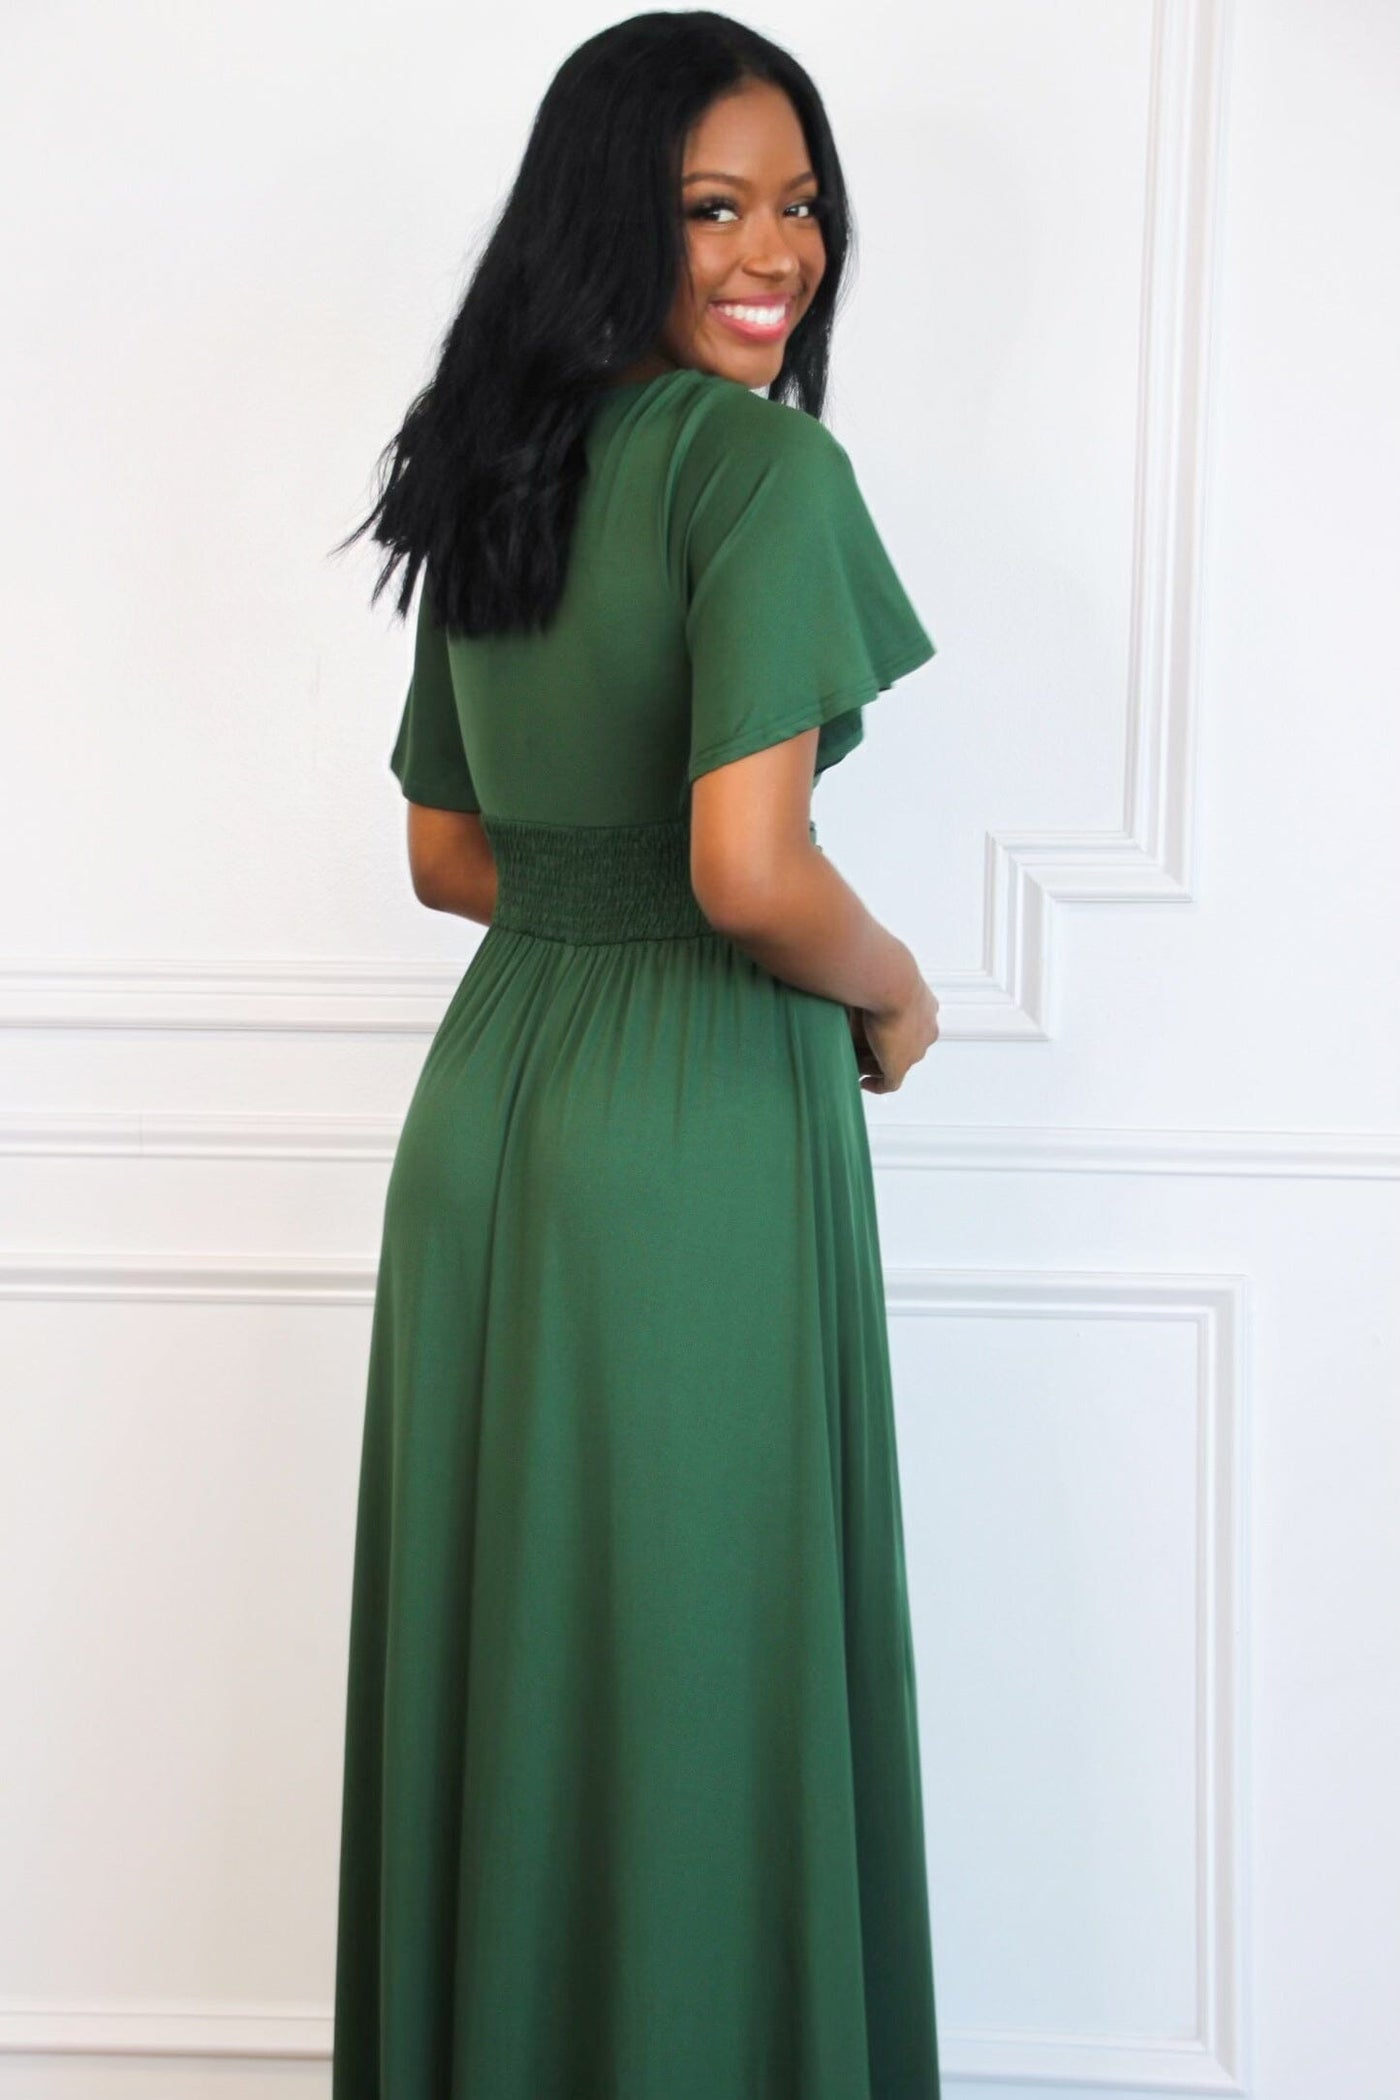 Simple Slit Maxi Dress: Hunter Green - Bella and Bloom Boutique